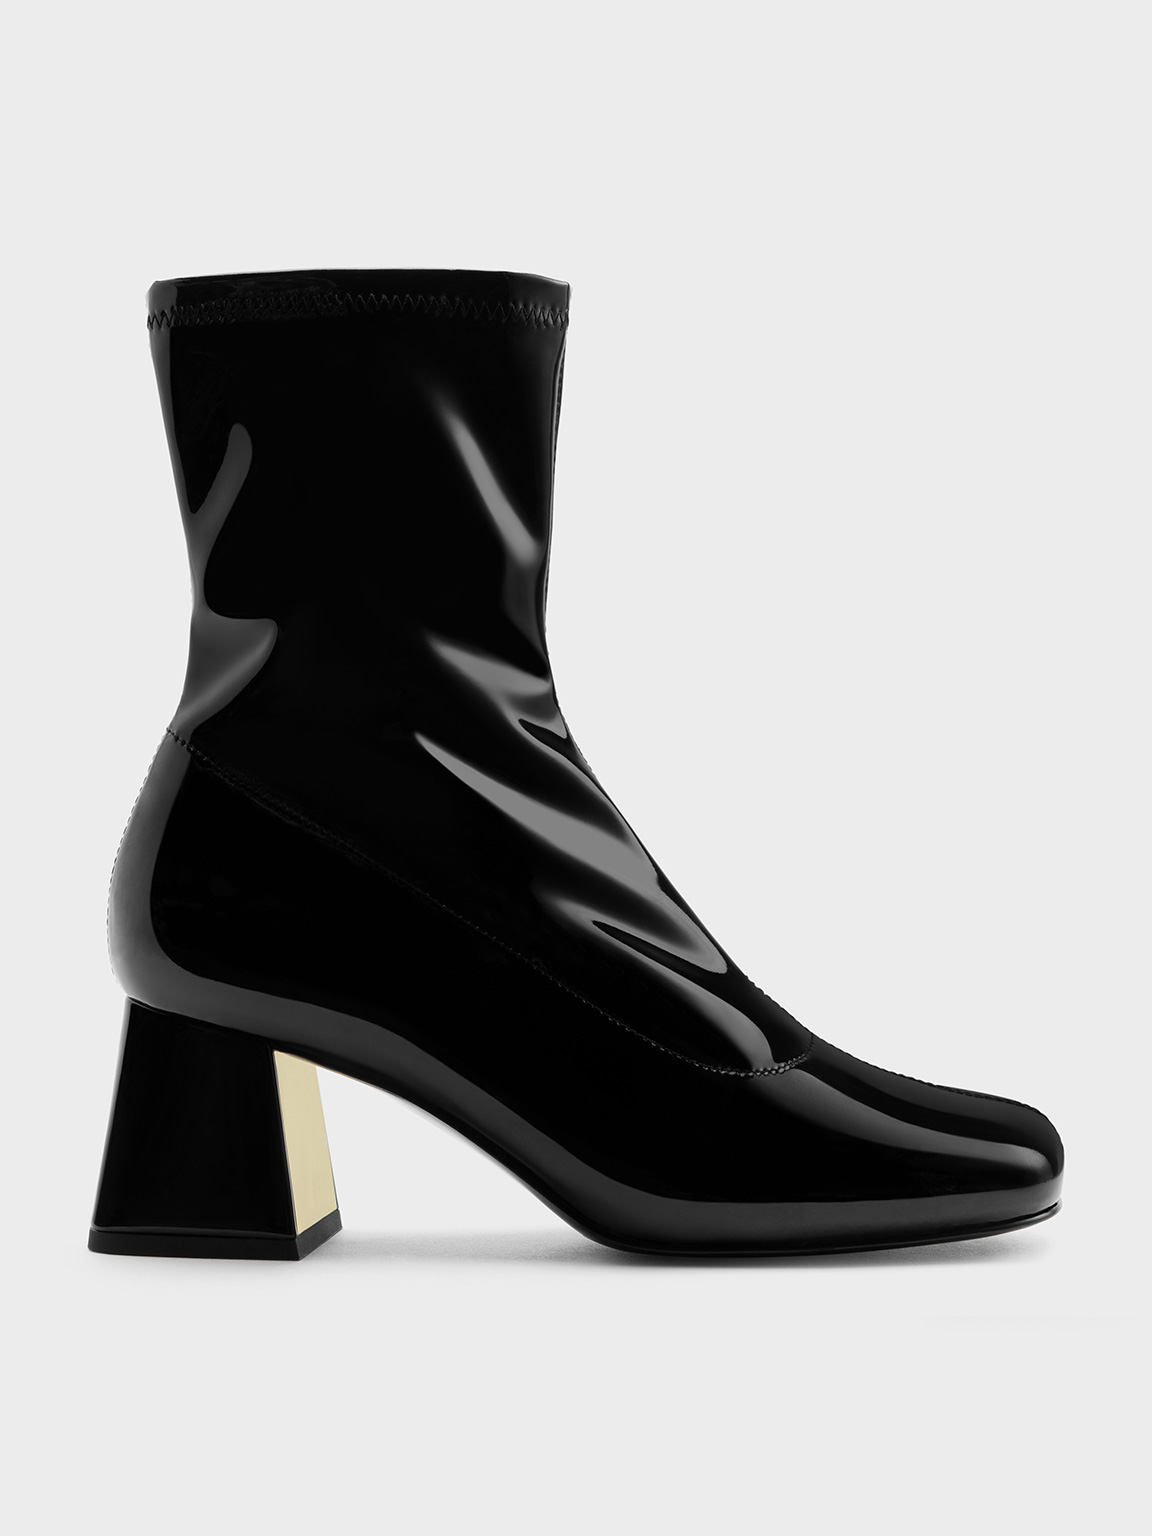 Black Patent Patent Metallic Trapeze Heel Ankle Boots - CHARLES & KEITH US